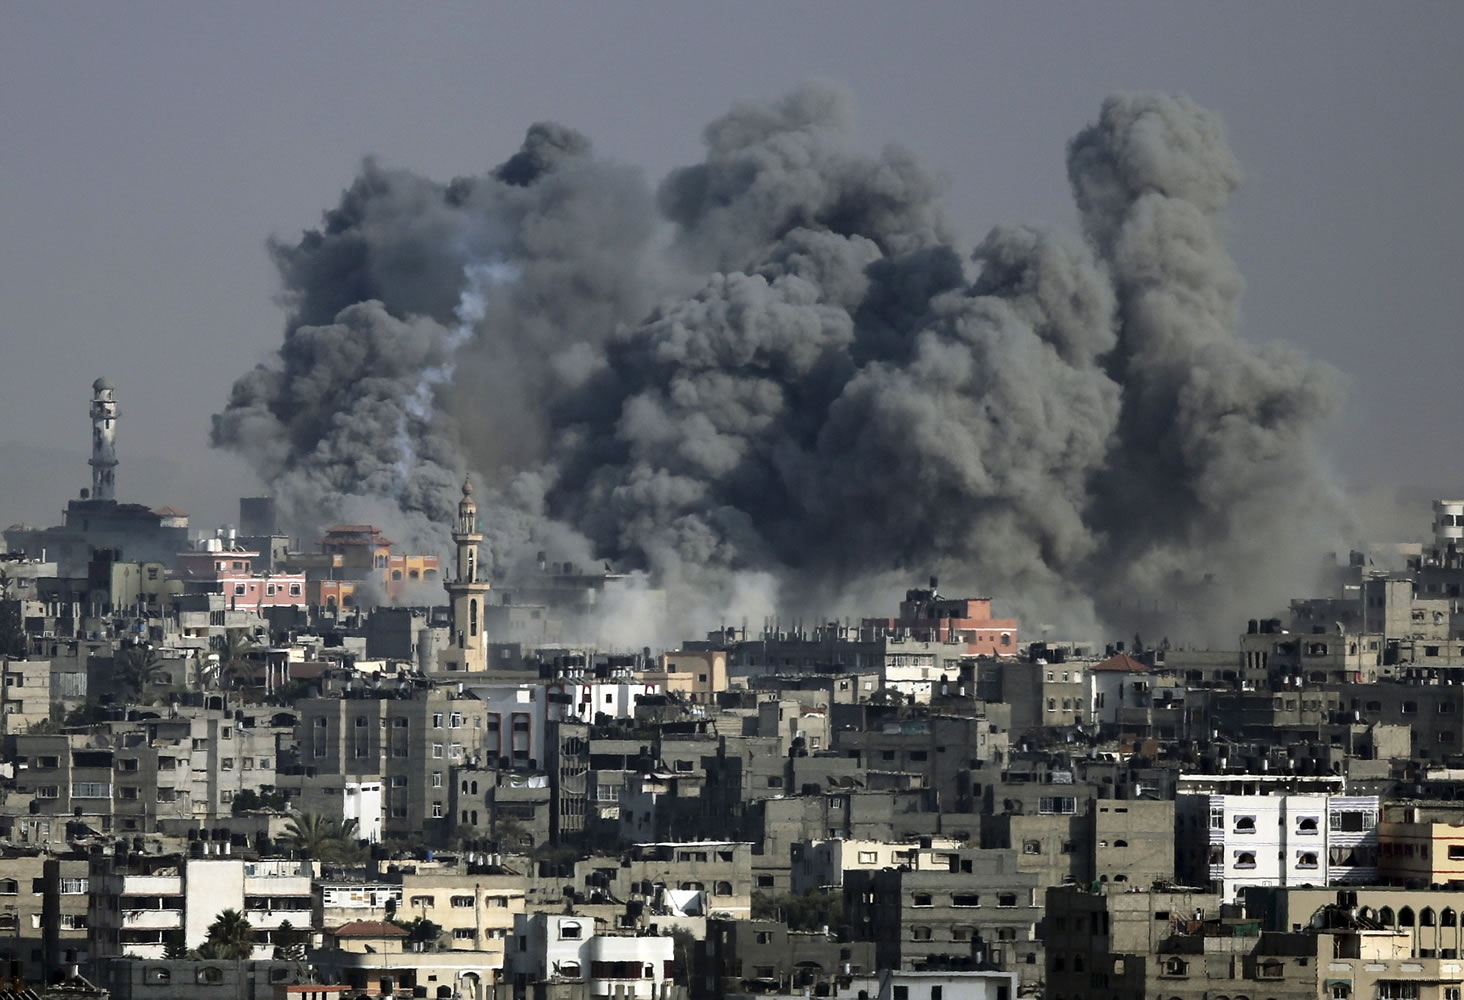 Smoke from an Israeli strike rises over Gaza City, Tuesday. Israeli airstrikes hit a wide range of locations along the coastal area of the Gaza Strip as diplomatic efforts intensified to end the two week war that has killed hundreds of Palestinians and dozens of Israelis.